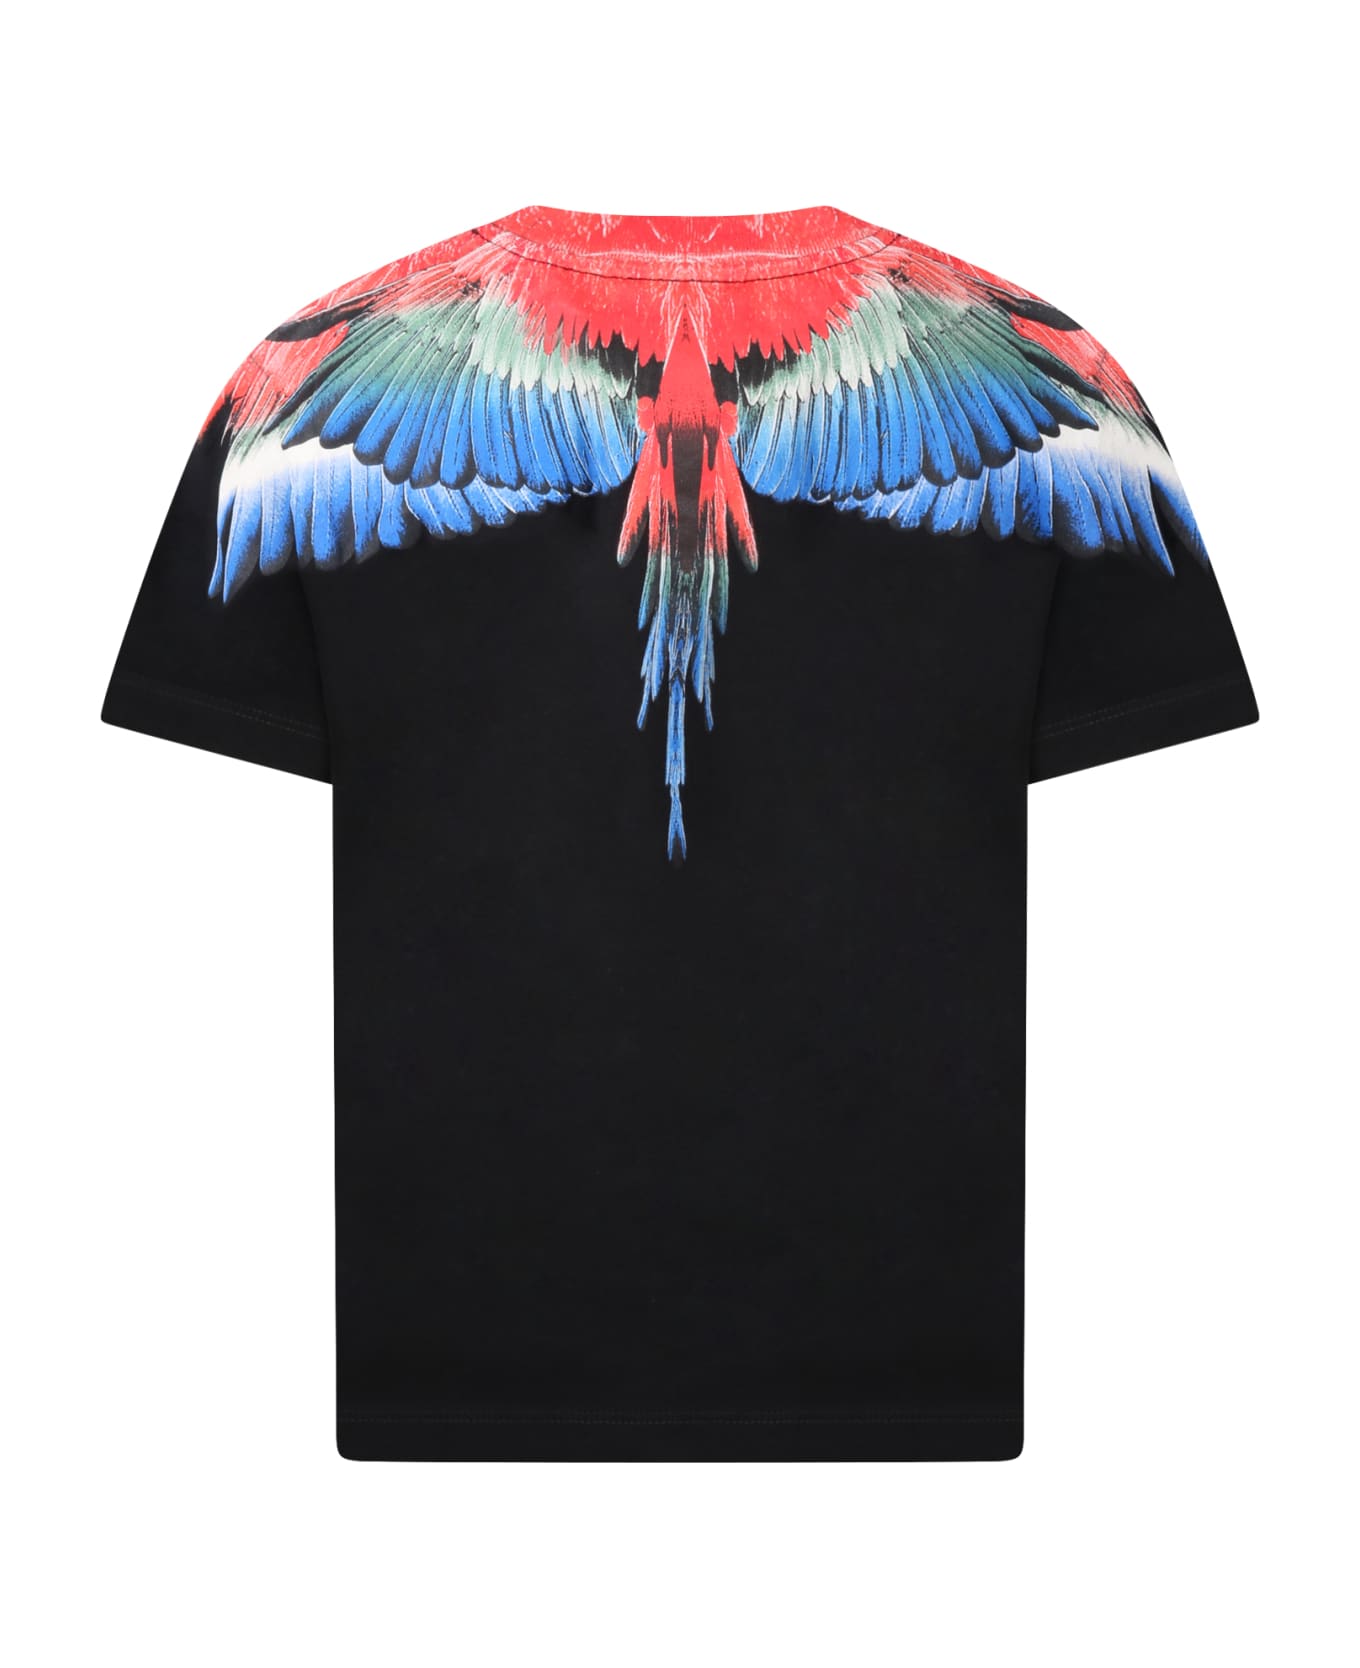 Marcelo Burlon Black T-shirt For Boy With Iconic Red And Blue Wings - Black